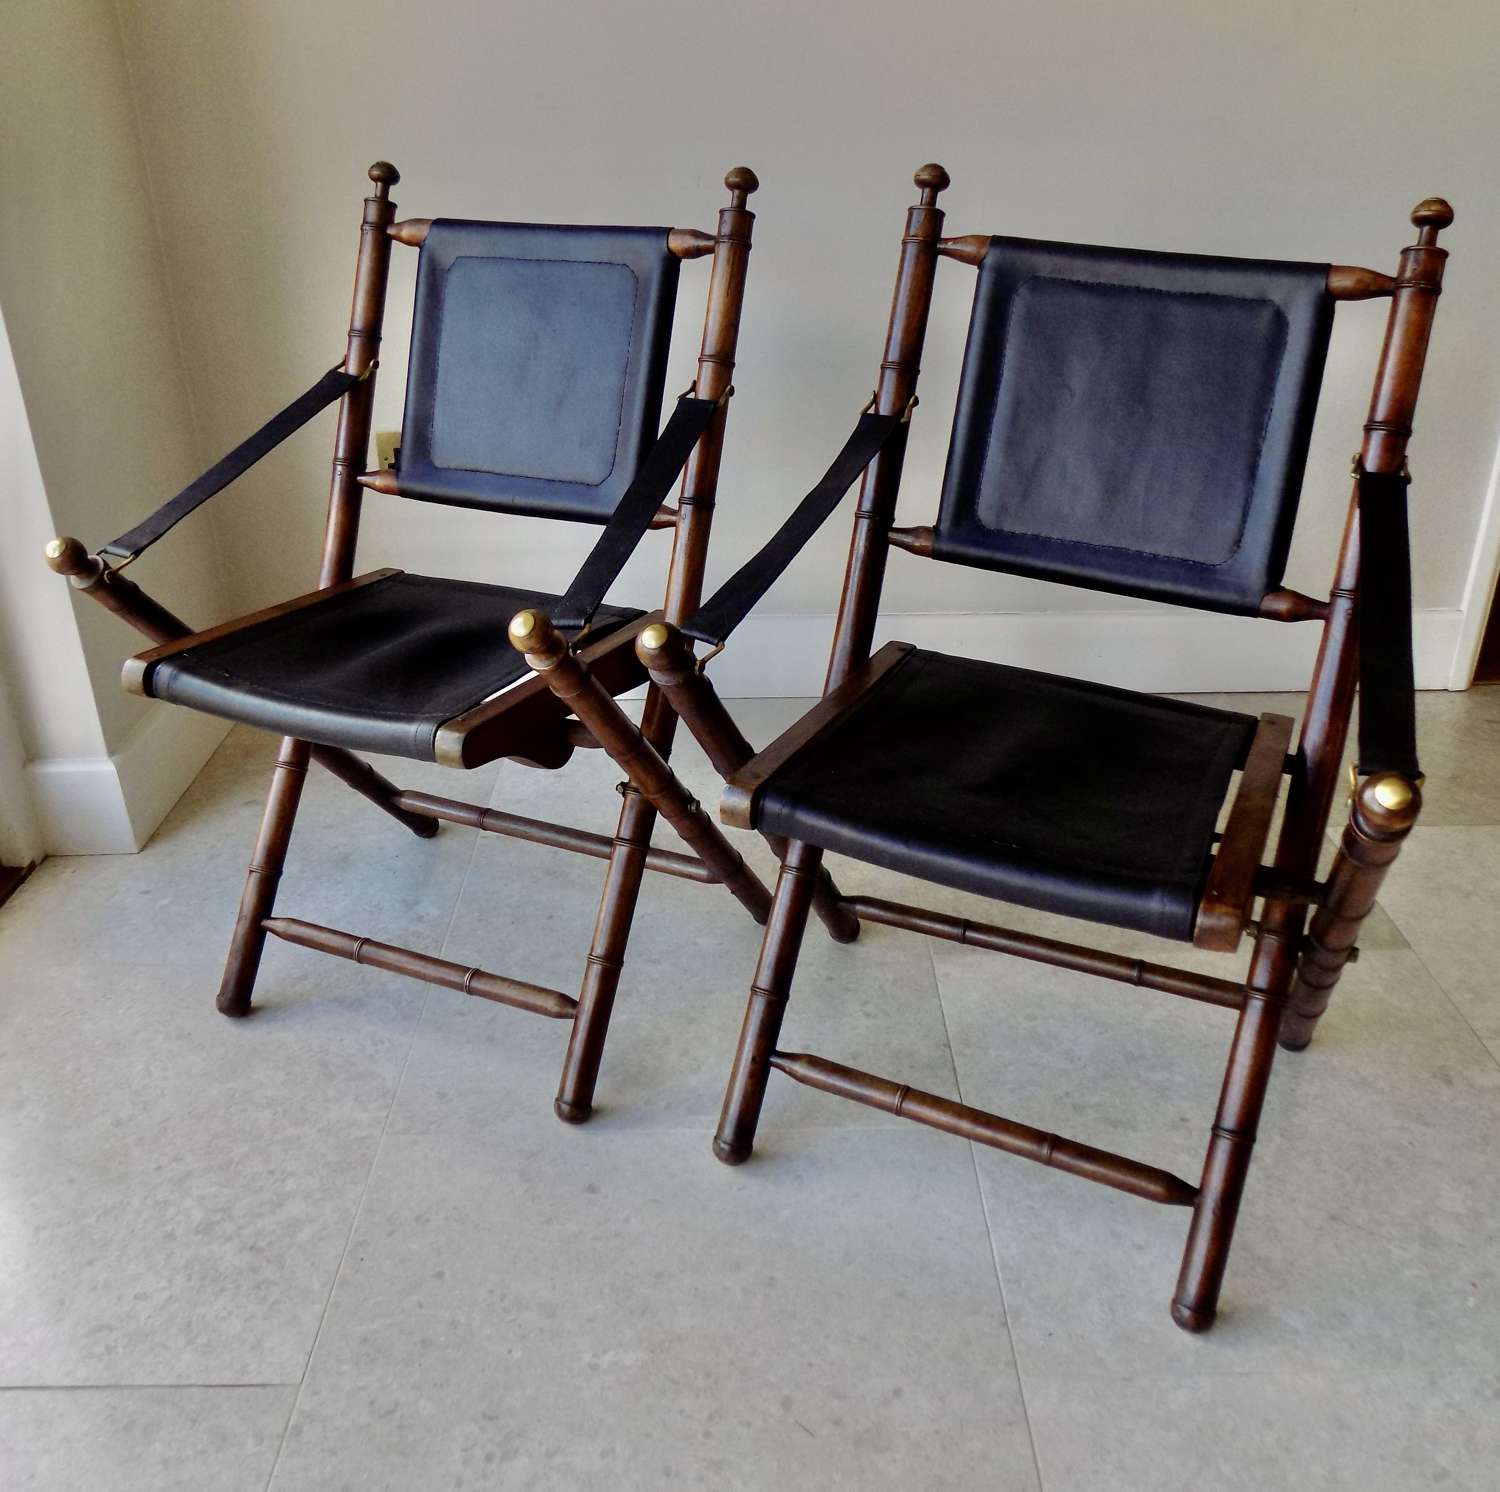 Pair of Campaign style foldable chairs.